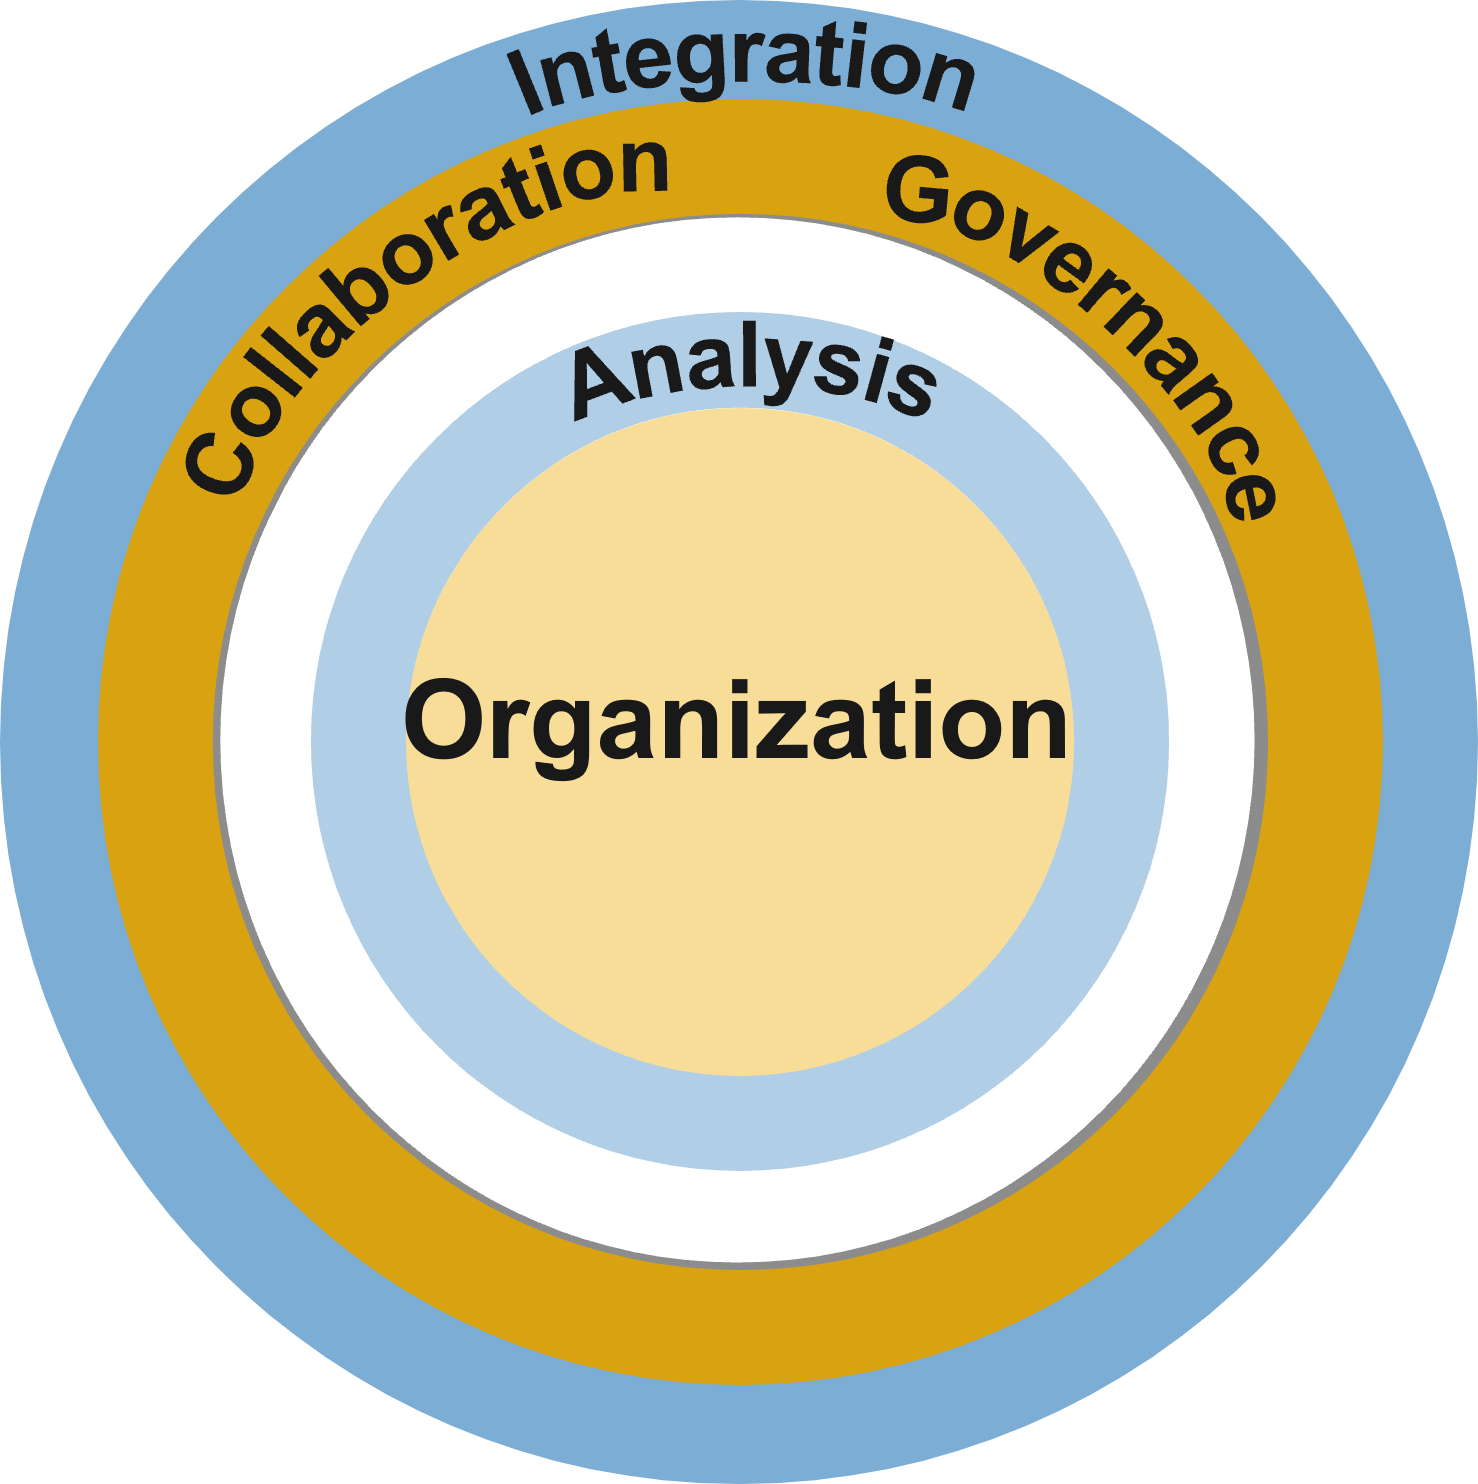 This image depicts Info-Tech's Operational Framework.  It consists of a series of five concentric circles, with each circle a different colour.  On the outer circle, is the word Integration.  The next outermost circle has the words Collaboration and Governance.  The next circle has no words, the next circle has the word Analysis, and the very centre circle has the word Organization.